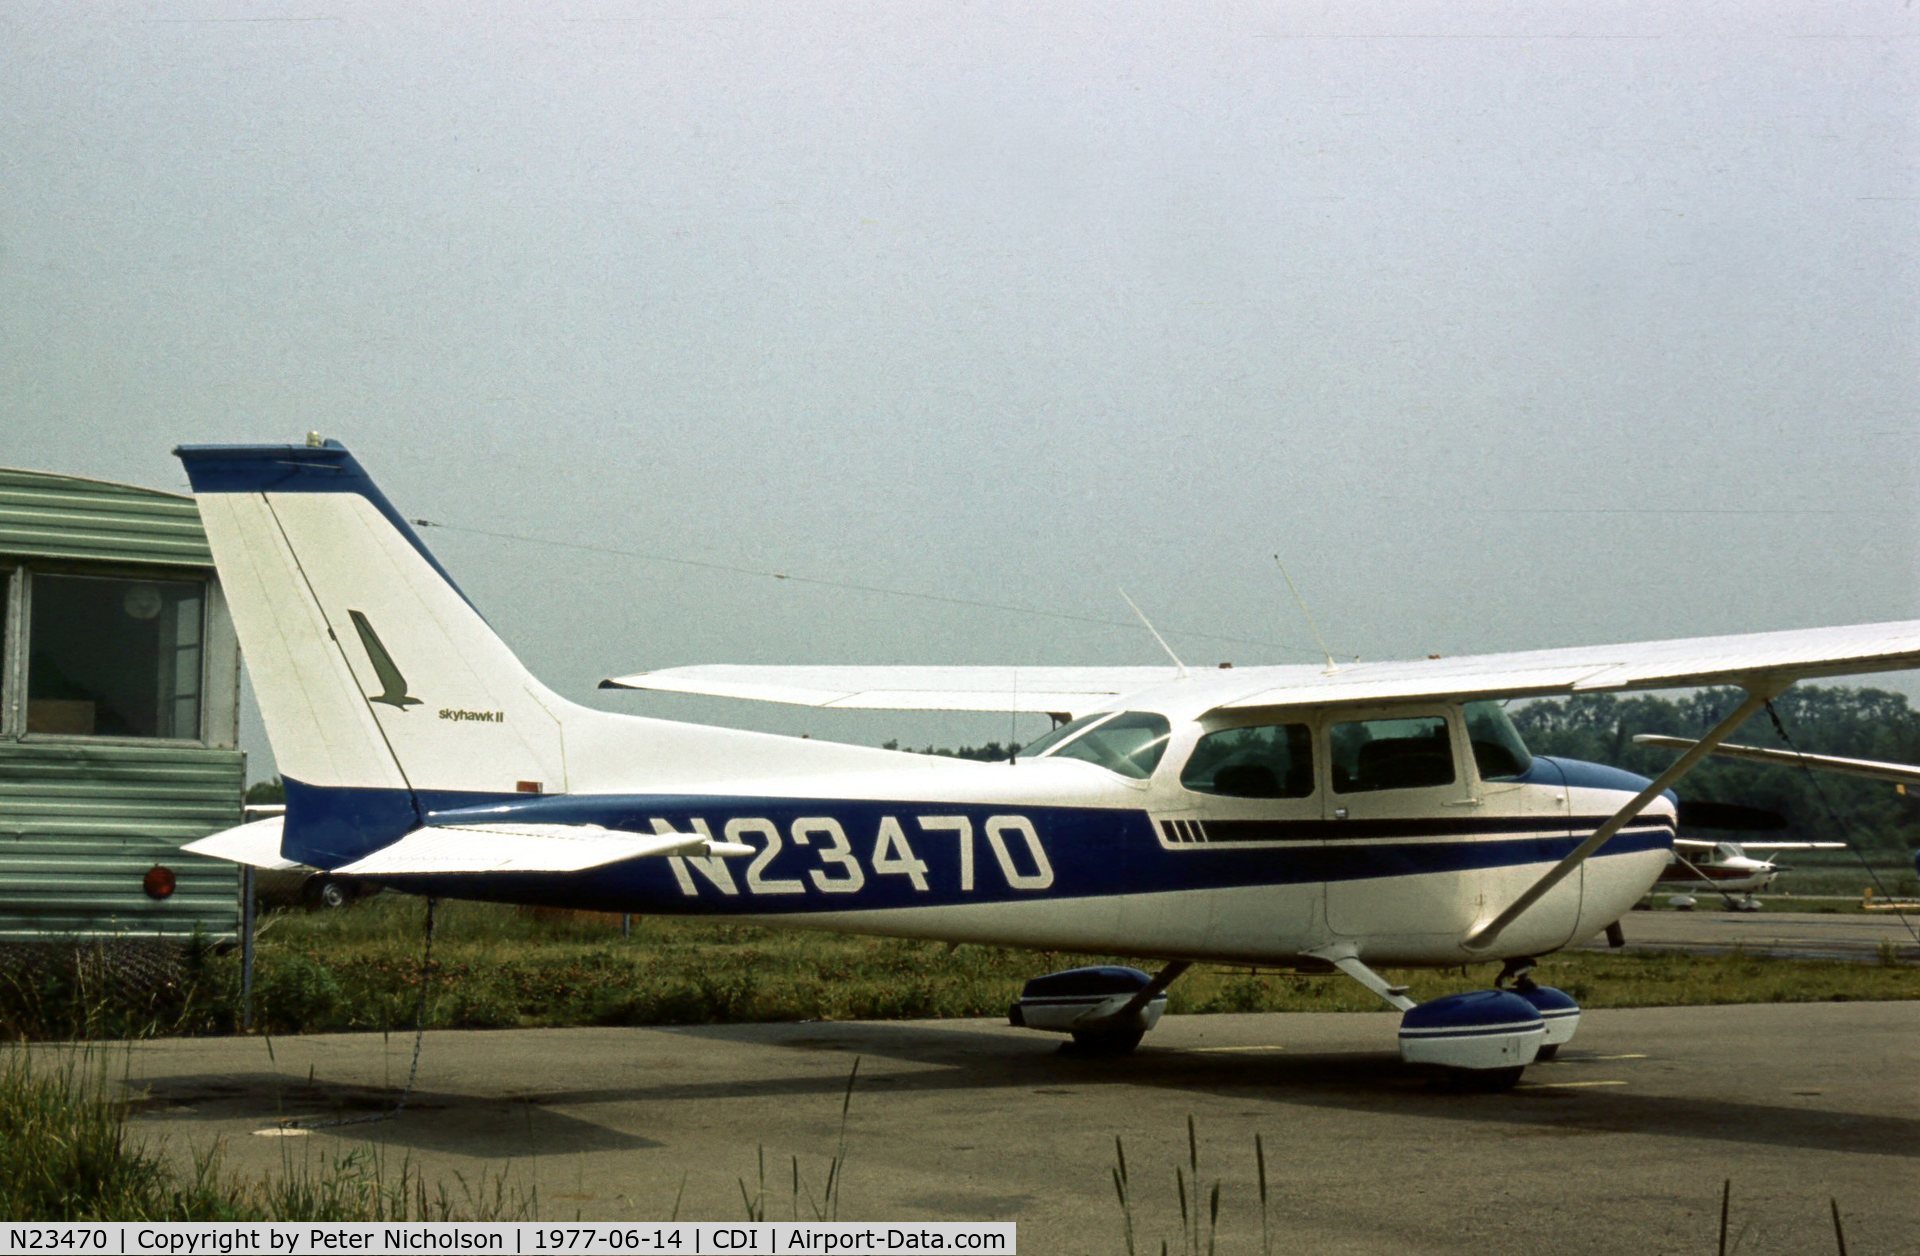 N23470, 1974 Cessna 172M C/N 17264090, This Skyhawk II was seen at Cambridge in the Summer of 1977.